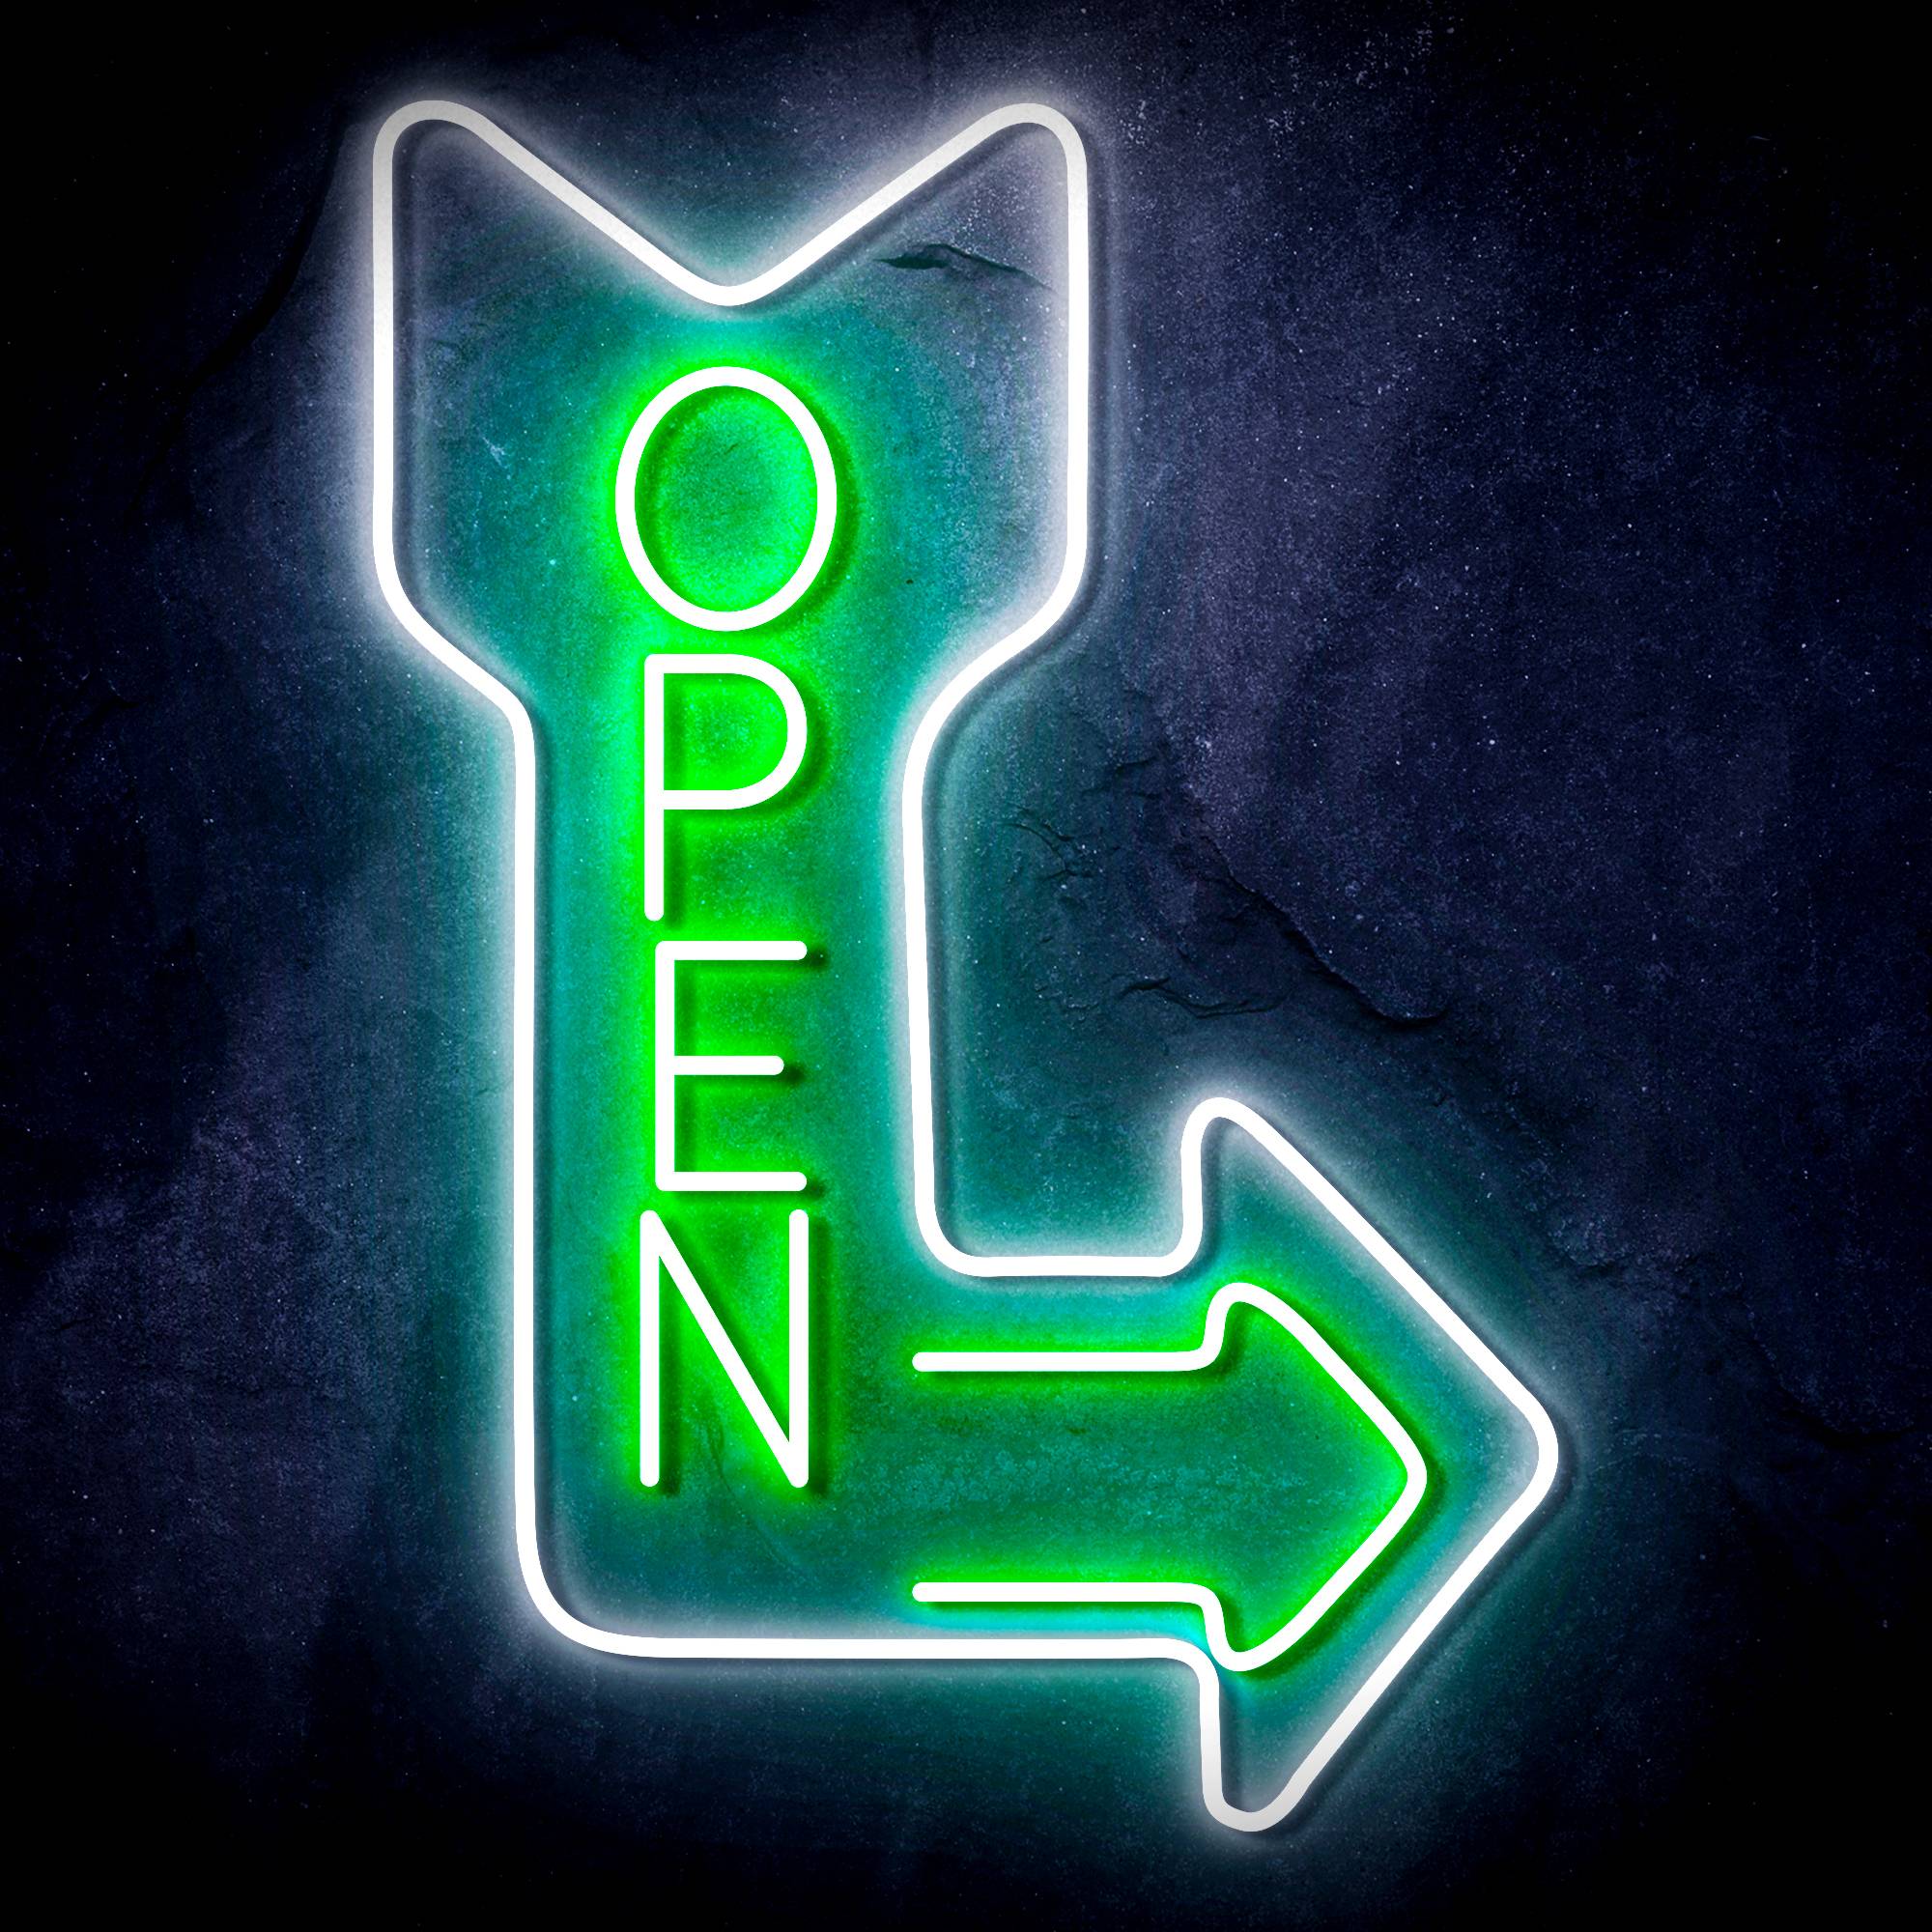 OPEN Signage Vertical with Arrow LED Neon Sign